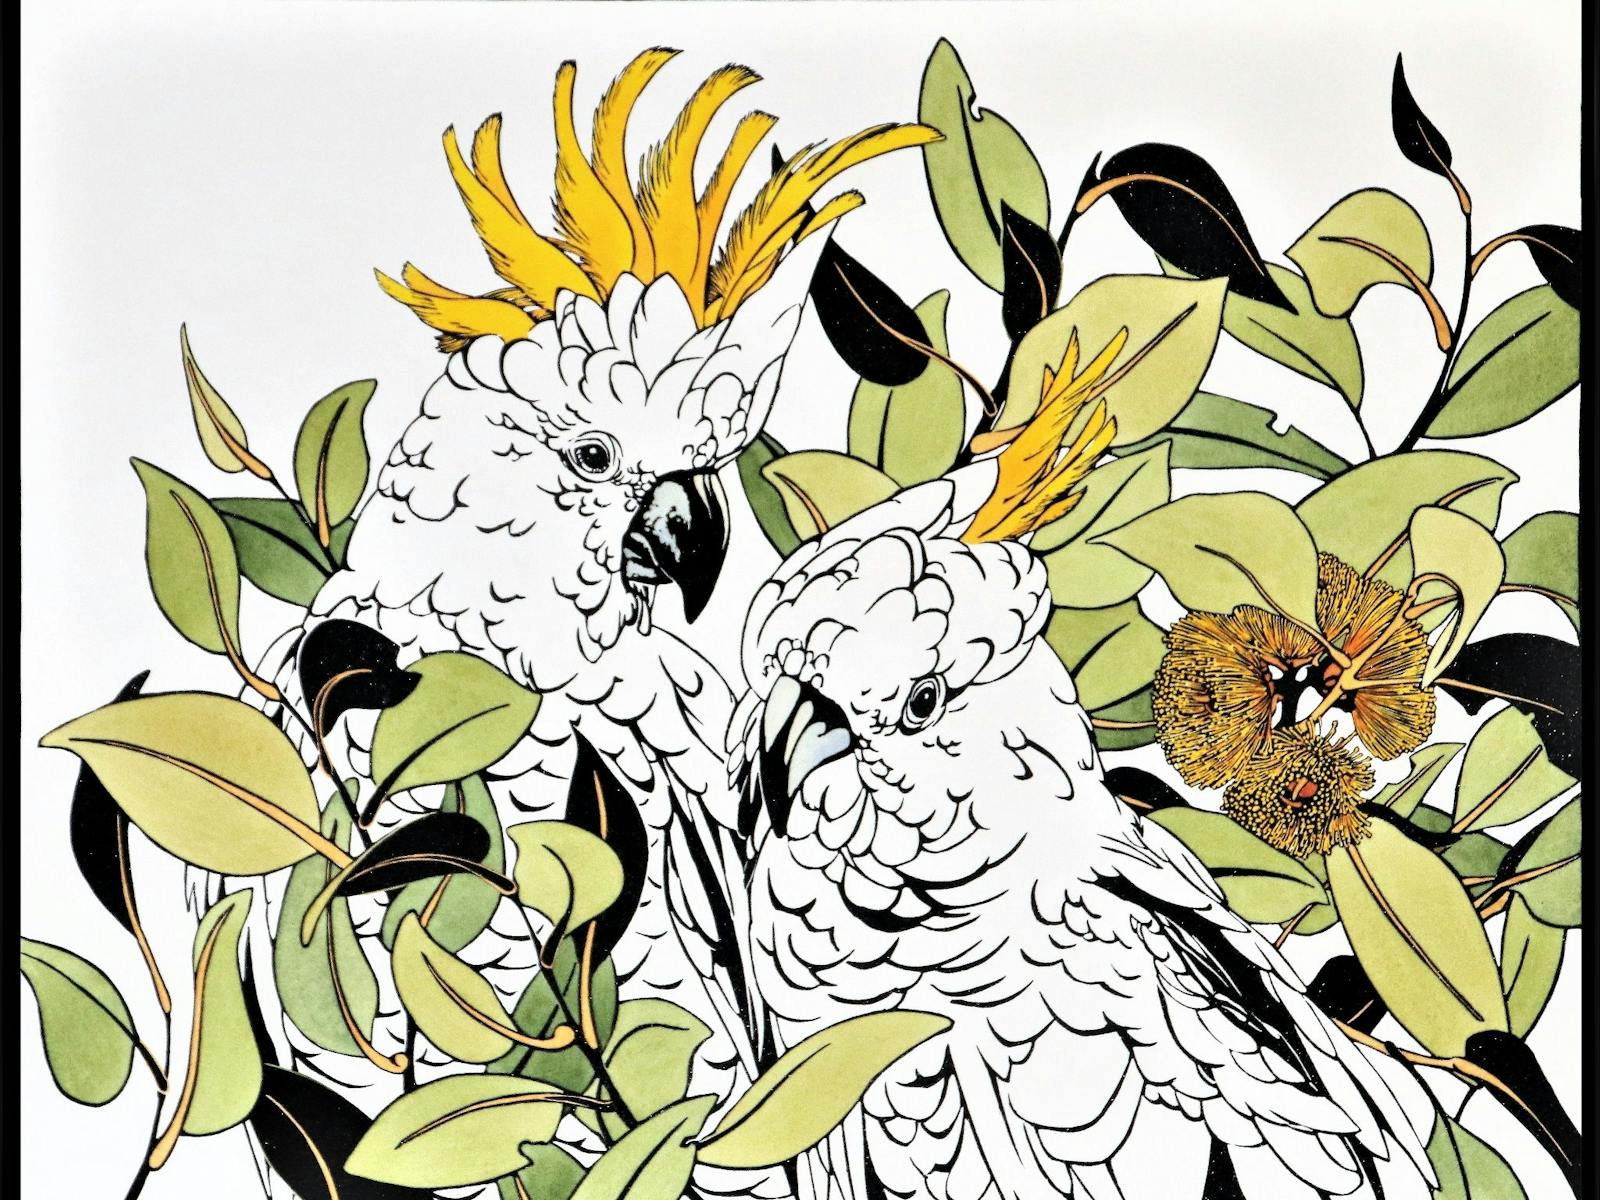 Image for "Birds & Blooms" - exhibition by Vida Pearson